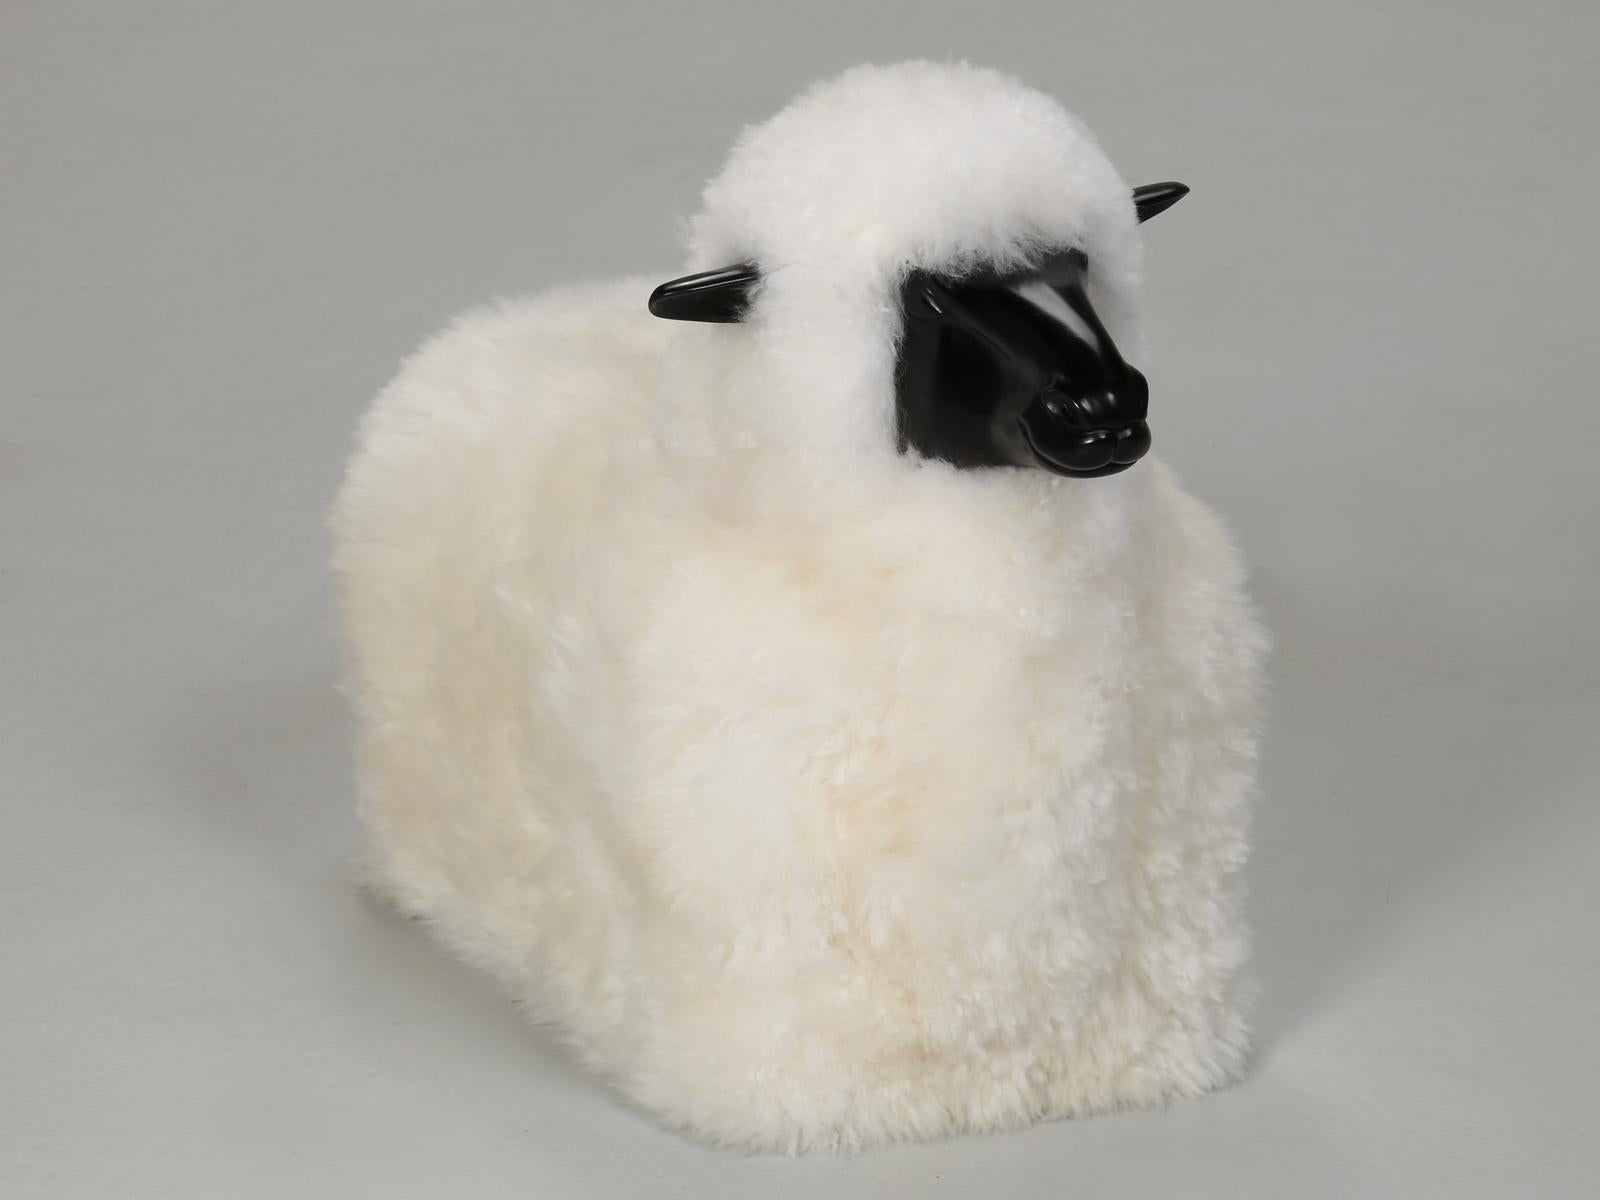 Meet the newest member of our Old Plank family, our “Mini Sheep”, “Baby Lamb”, Baby Sheep, or simply a very cute table topper? Whatever your preference, she is undeniably adorable and makes virtually everyone smile. The body of our Baby Lamb is made